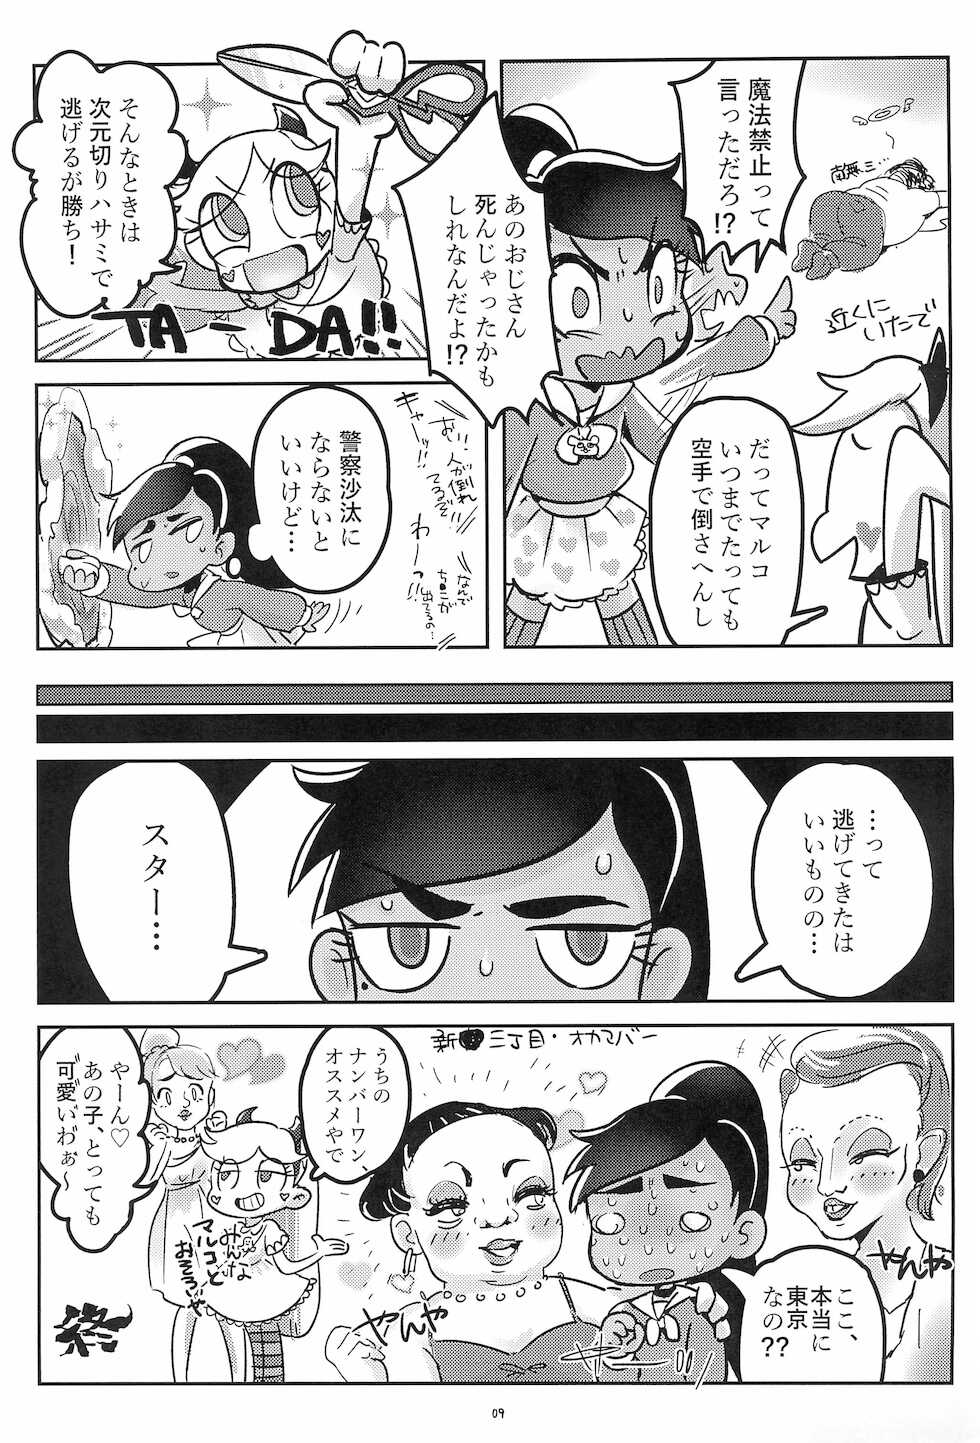 (C92) ["AAA" UDON SHOP (Moccha, Hanya)] Fashion MONSTER Party (Star vs. The Forces of Evil) - Page 13